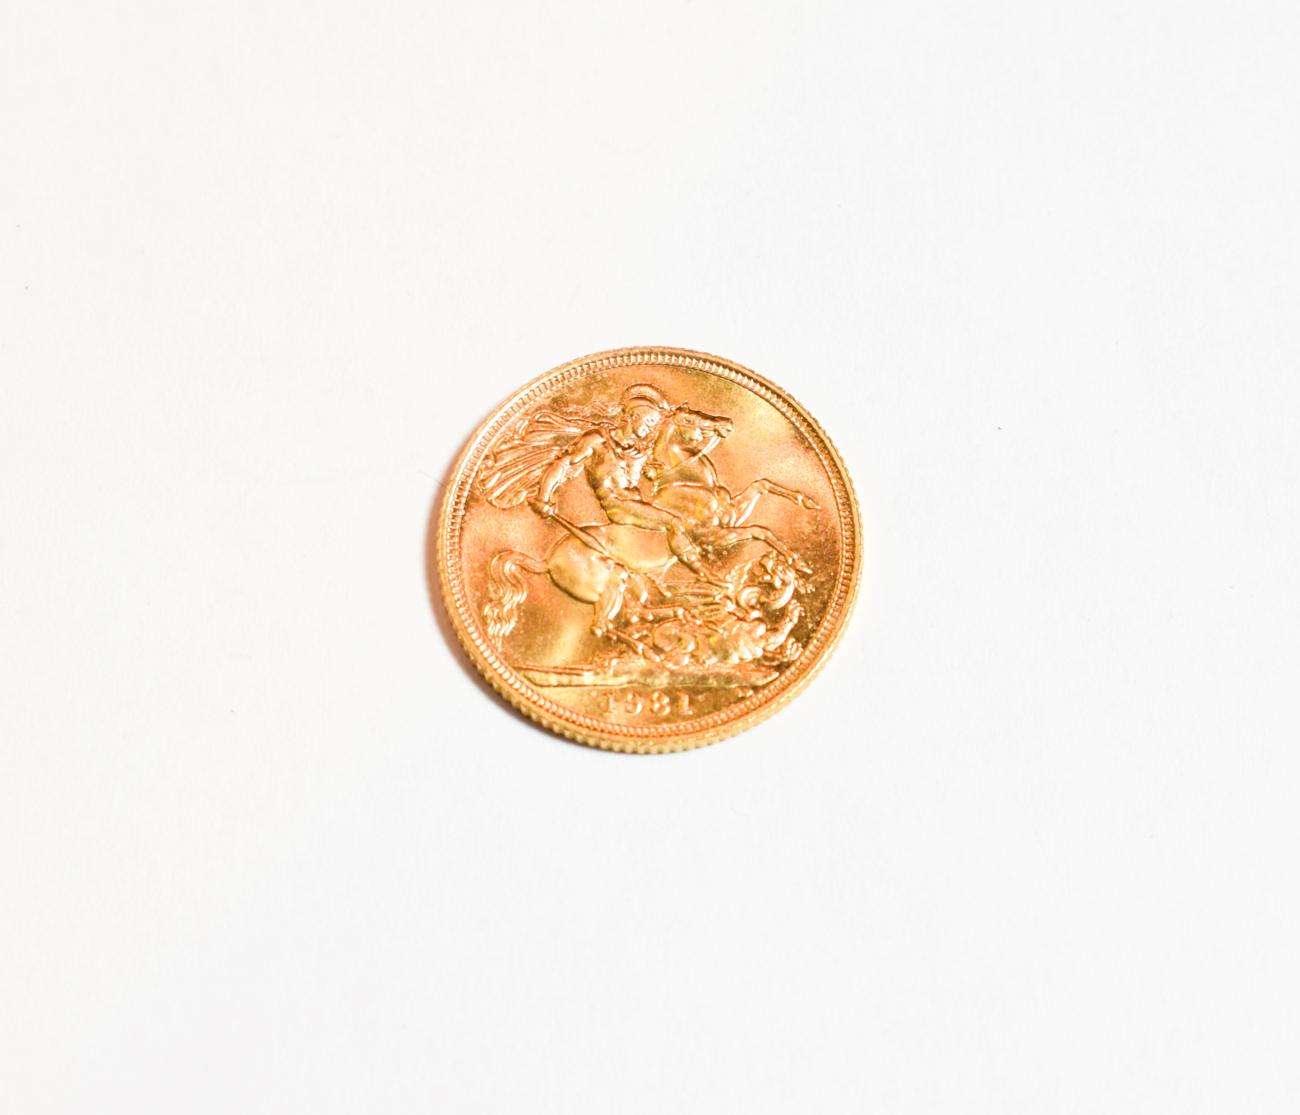 Lot 73 - A full gold sovereign, dated 1981